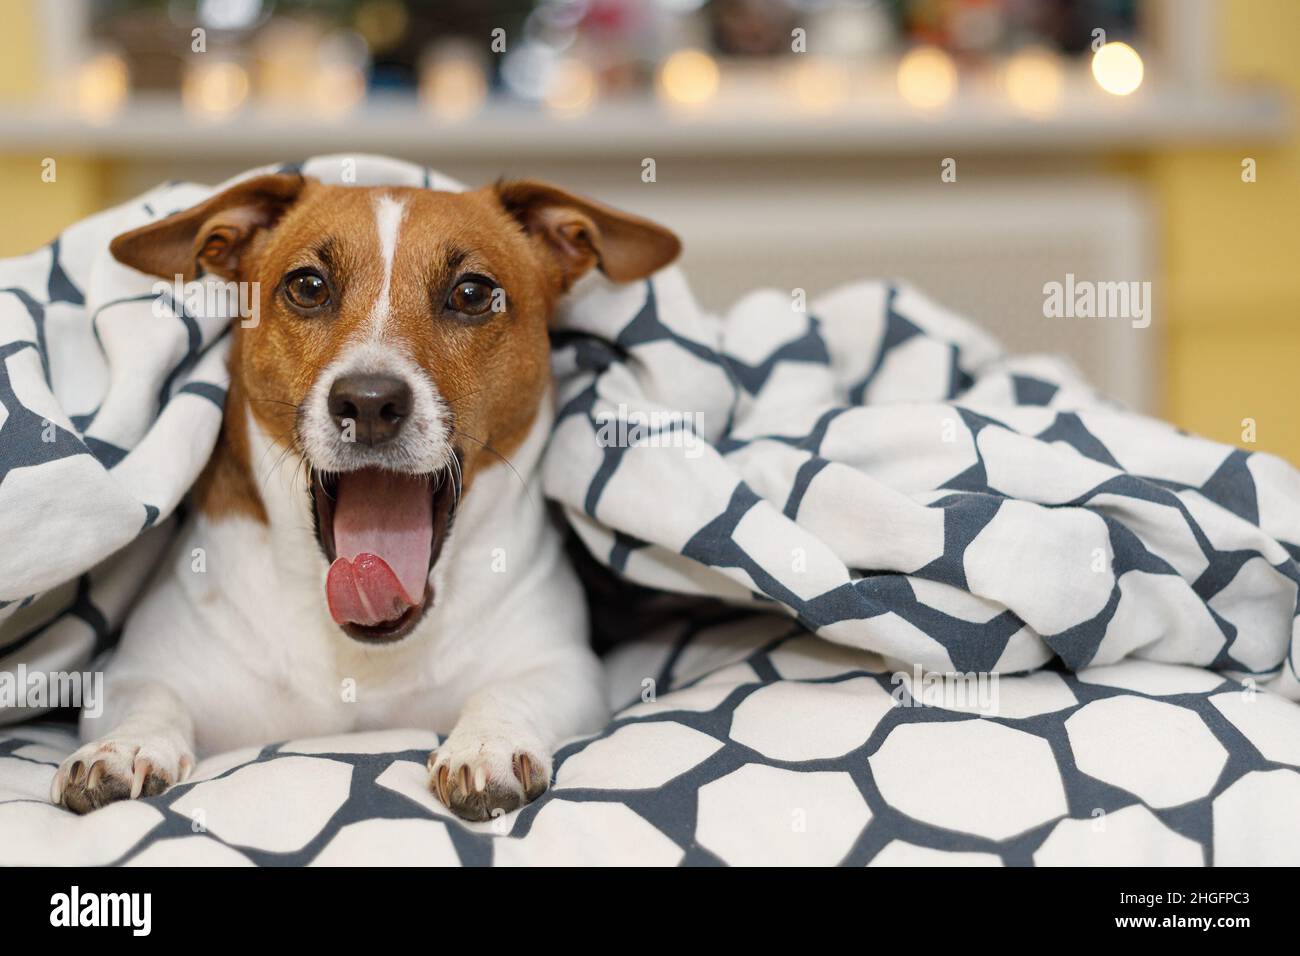 Cute jack russell dog resting or sleeping under a blanket. Stock Photo